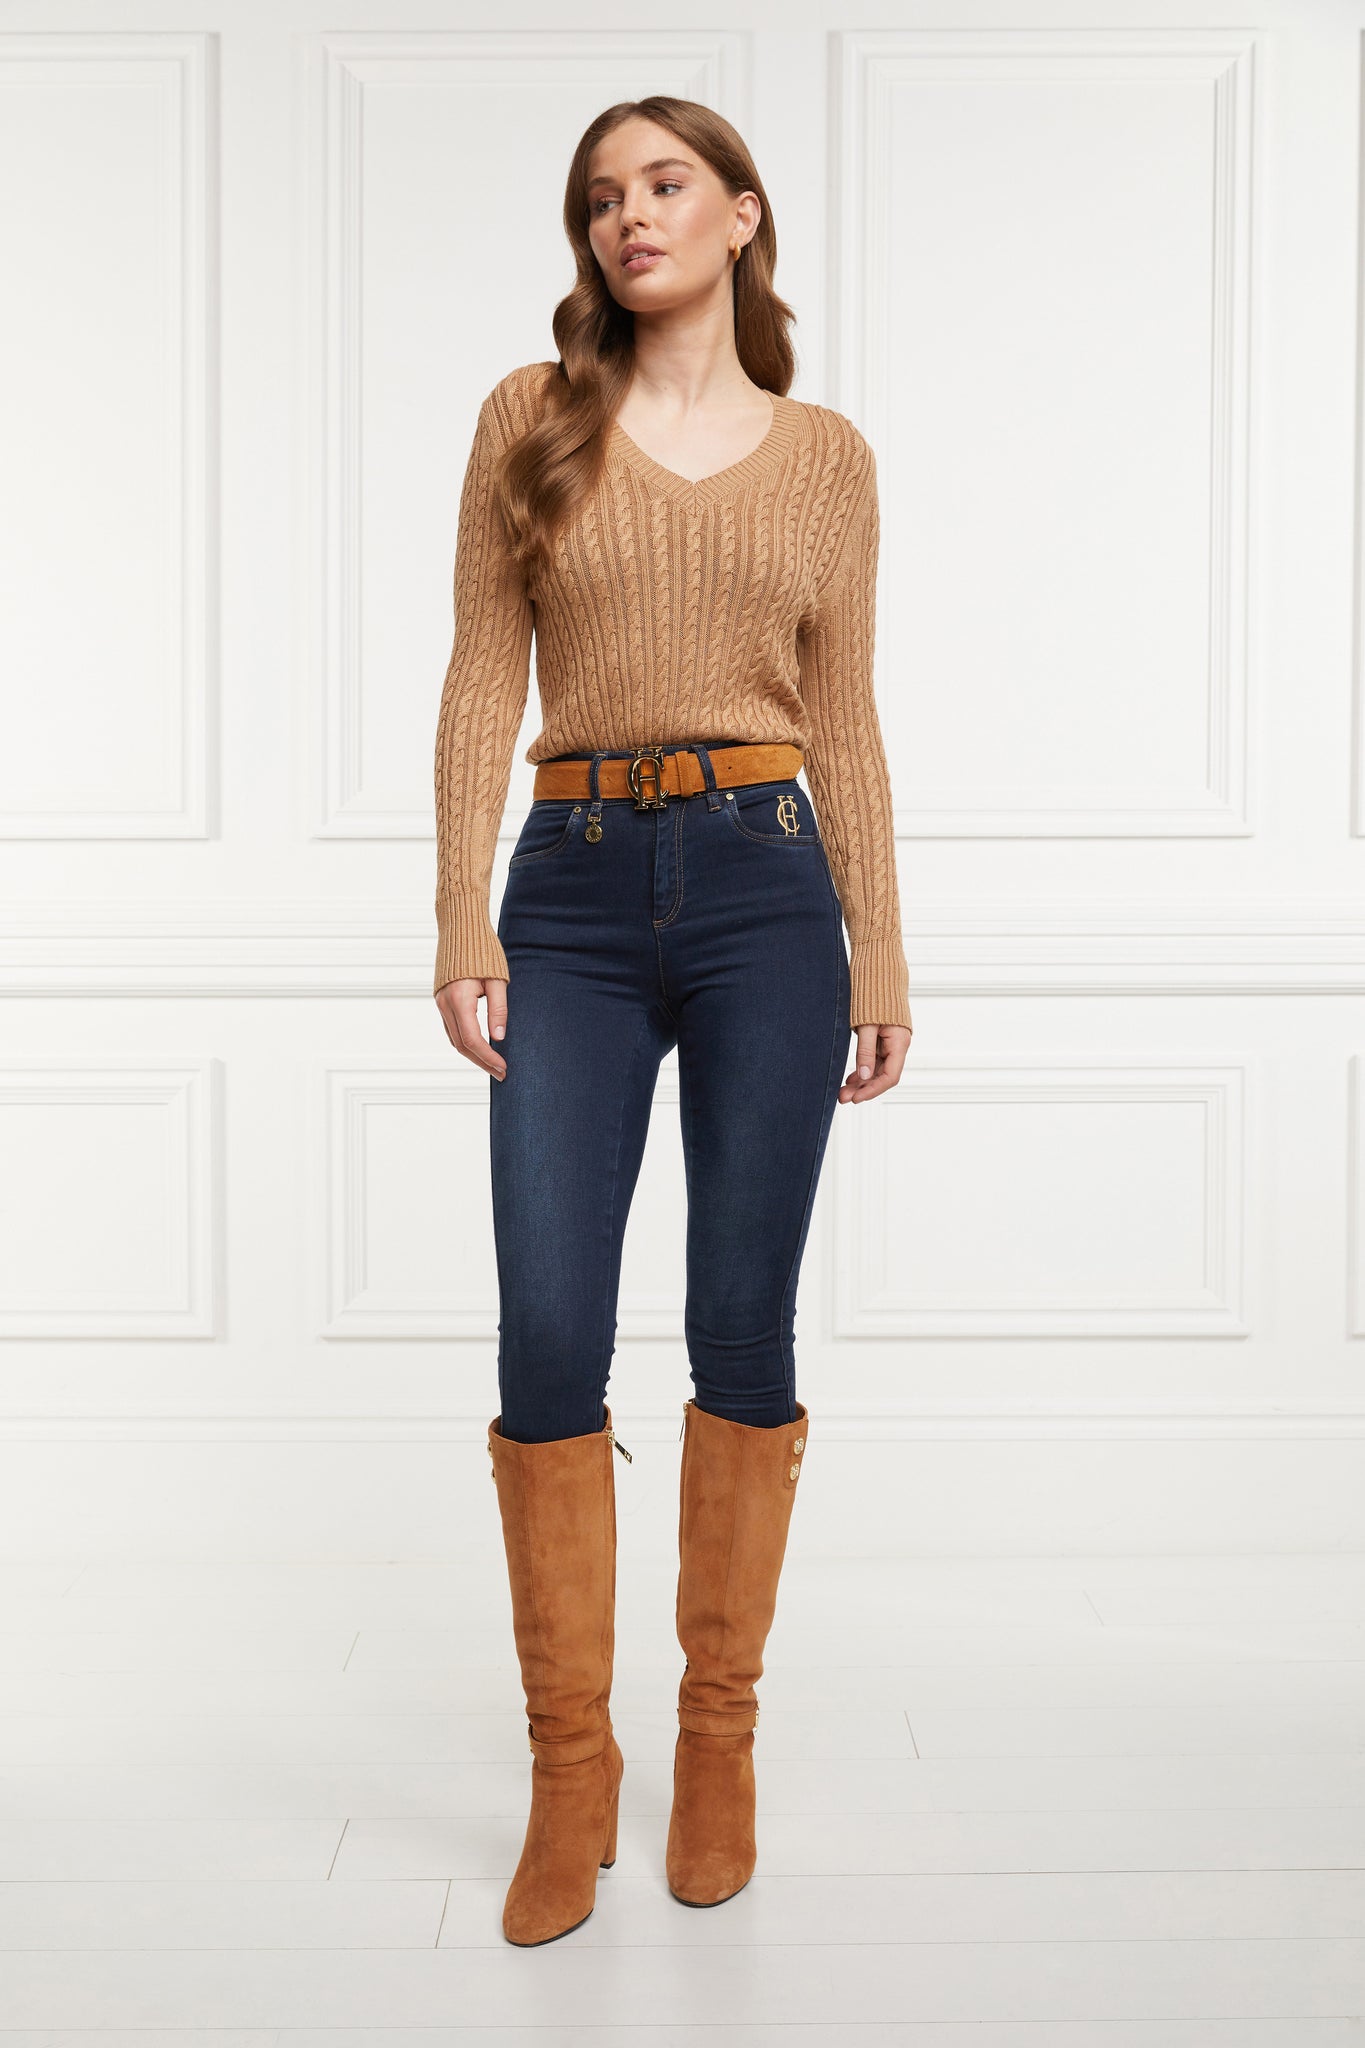 womens lightweight v neck cable knit jumper in dark caramel detailed with gold buttons at the cuffs paired with dark denim jeans and tan knee high boots